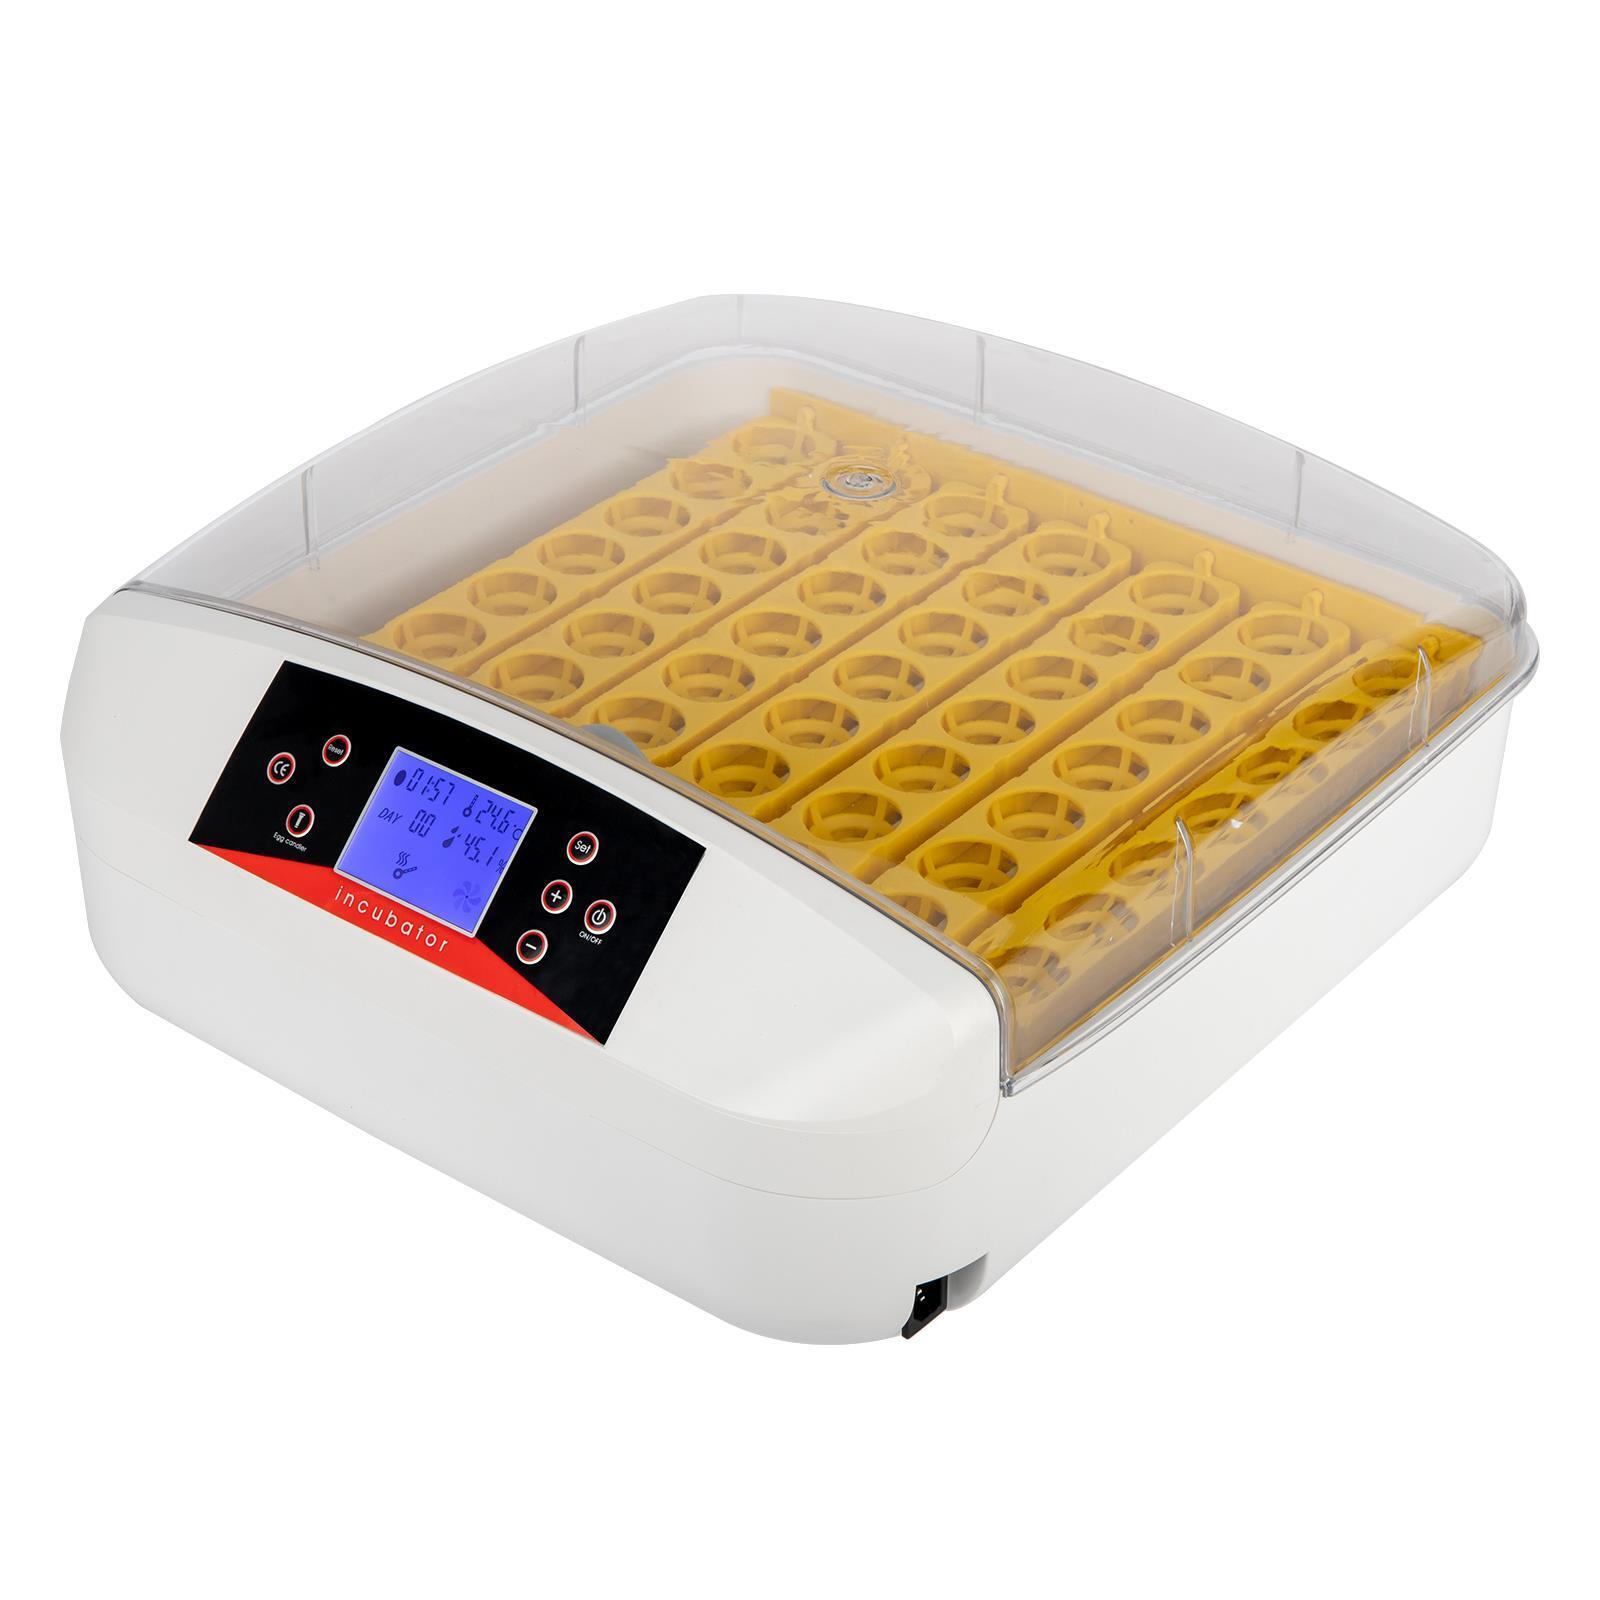 thinkstar Automatic Hatching Incubator Egg Candler 56 Eggs Turner Cover Pet Supplies Home